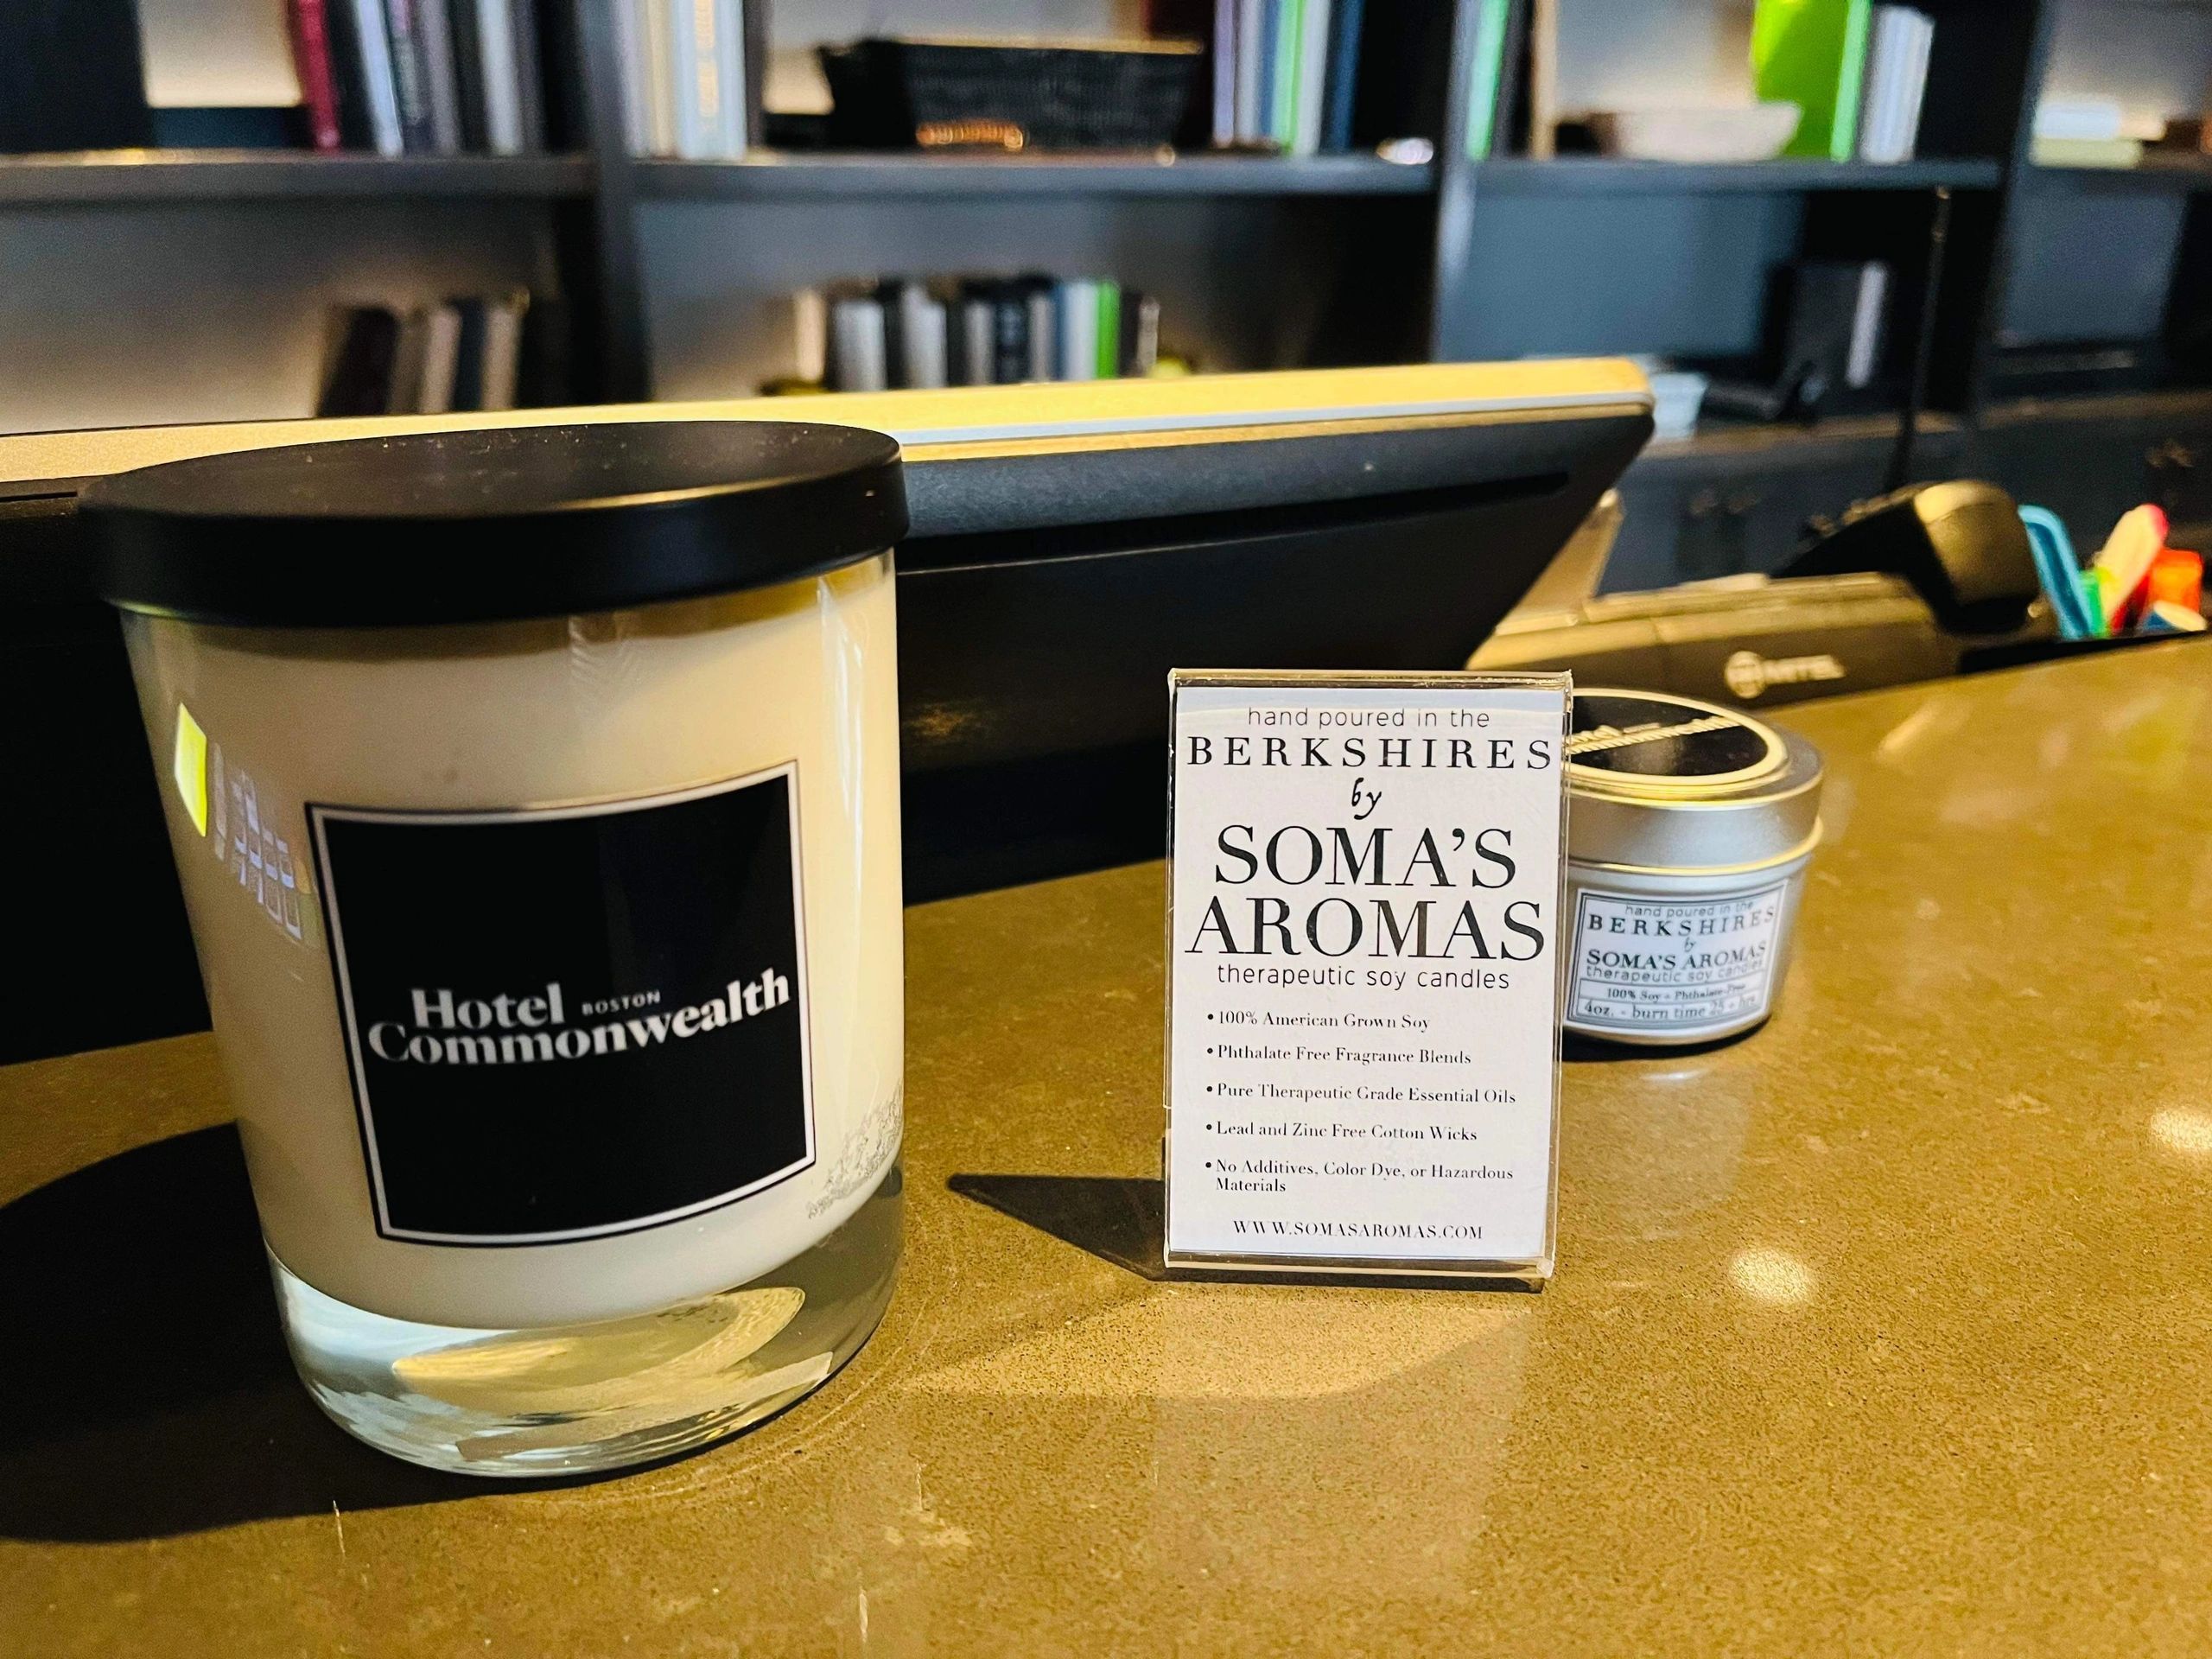 SOMA Small Batch Goods - Calm - Limited Edition Pure Essential Oil Candle  Eco-Friendly Soy Candle